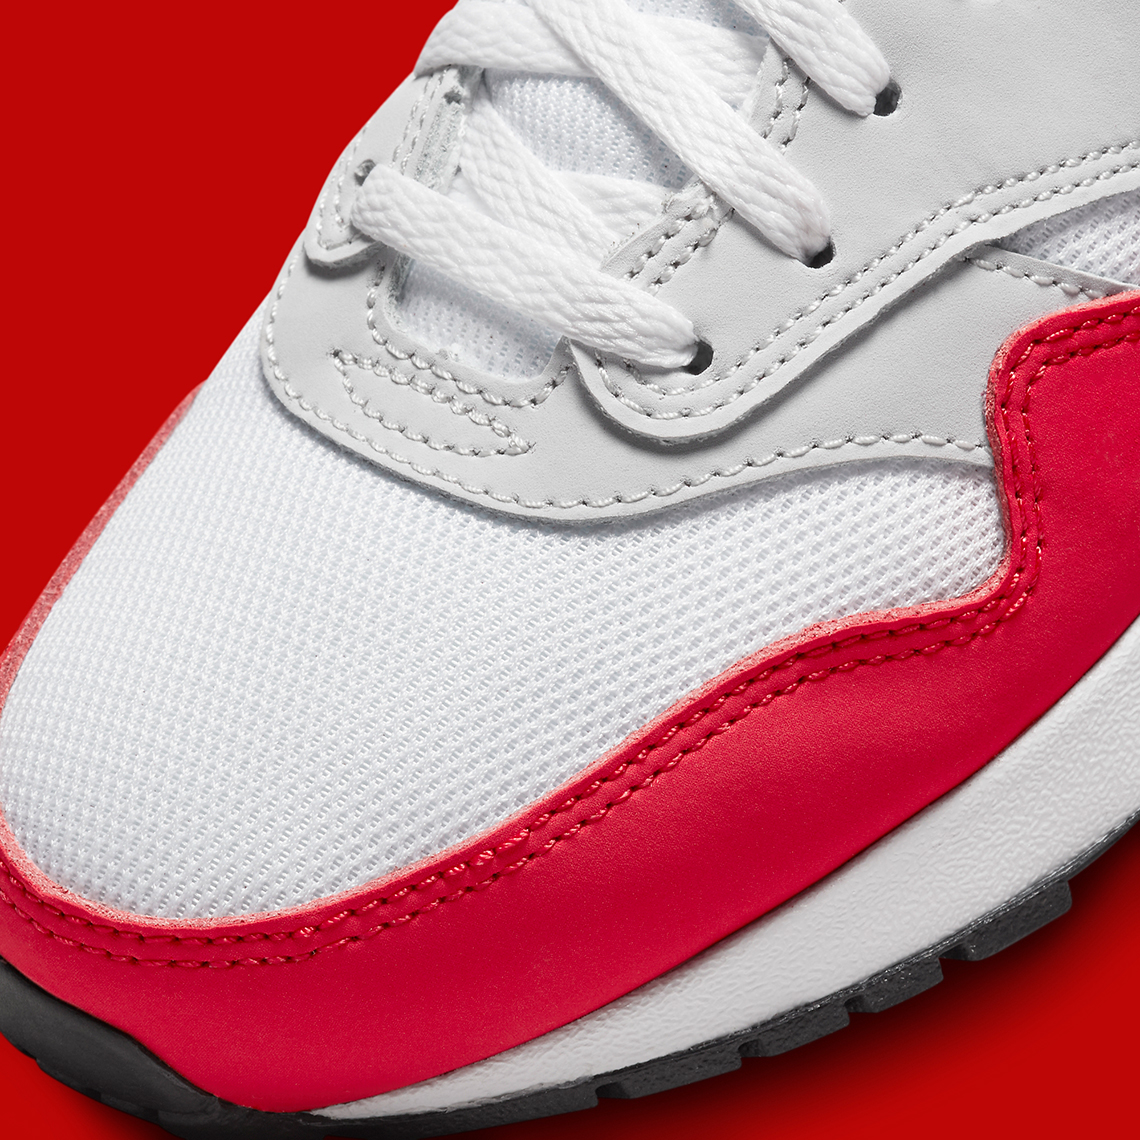 Nike Air Max 1 Gs Sport Red Dz3307 003 Release Date 5